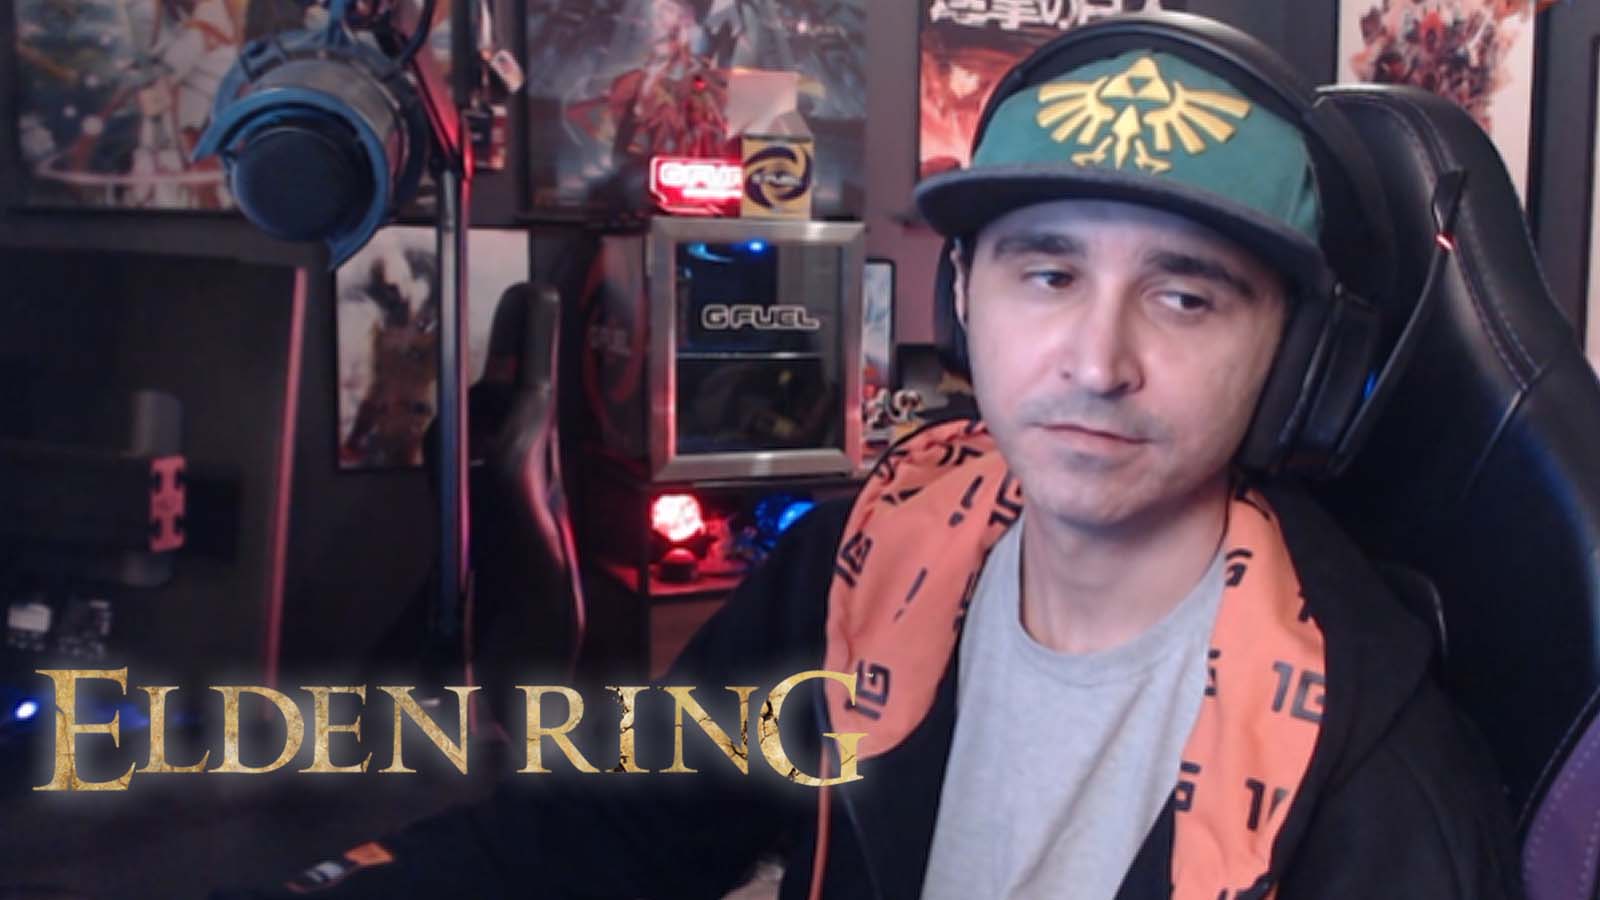 Summit1g rage-quits Elden Ring over “stupid” feature, but he's not giving  up - Dexerto